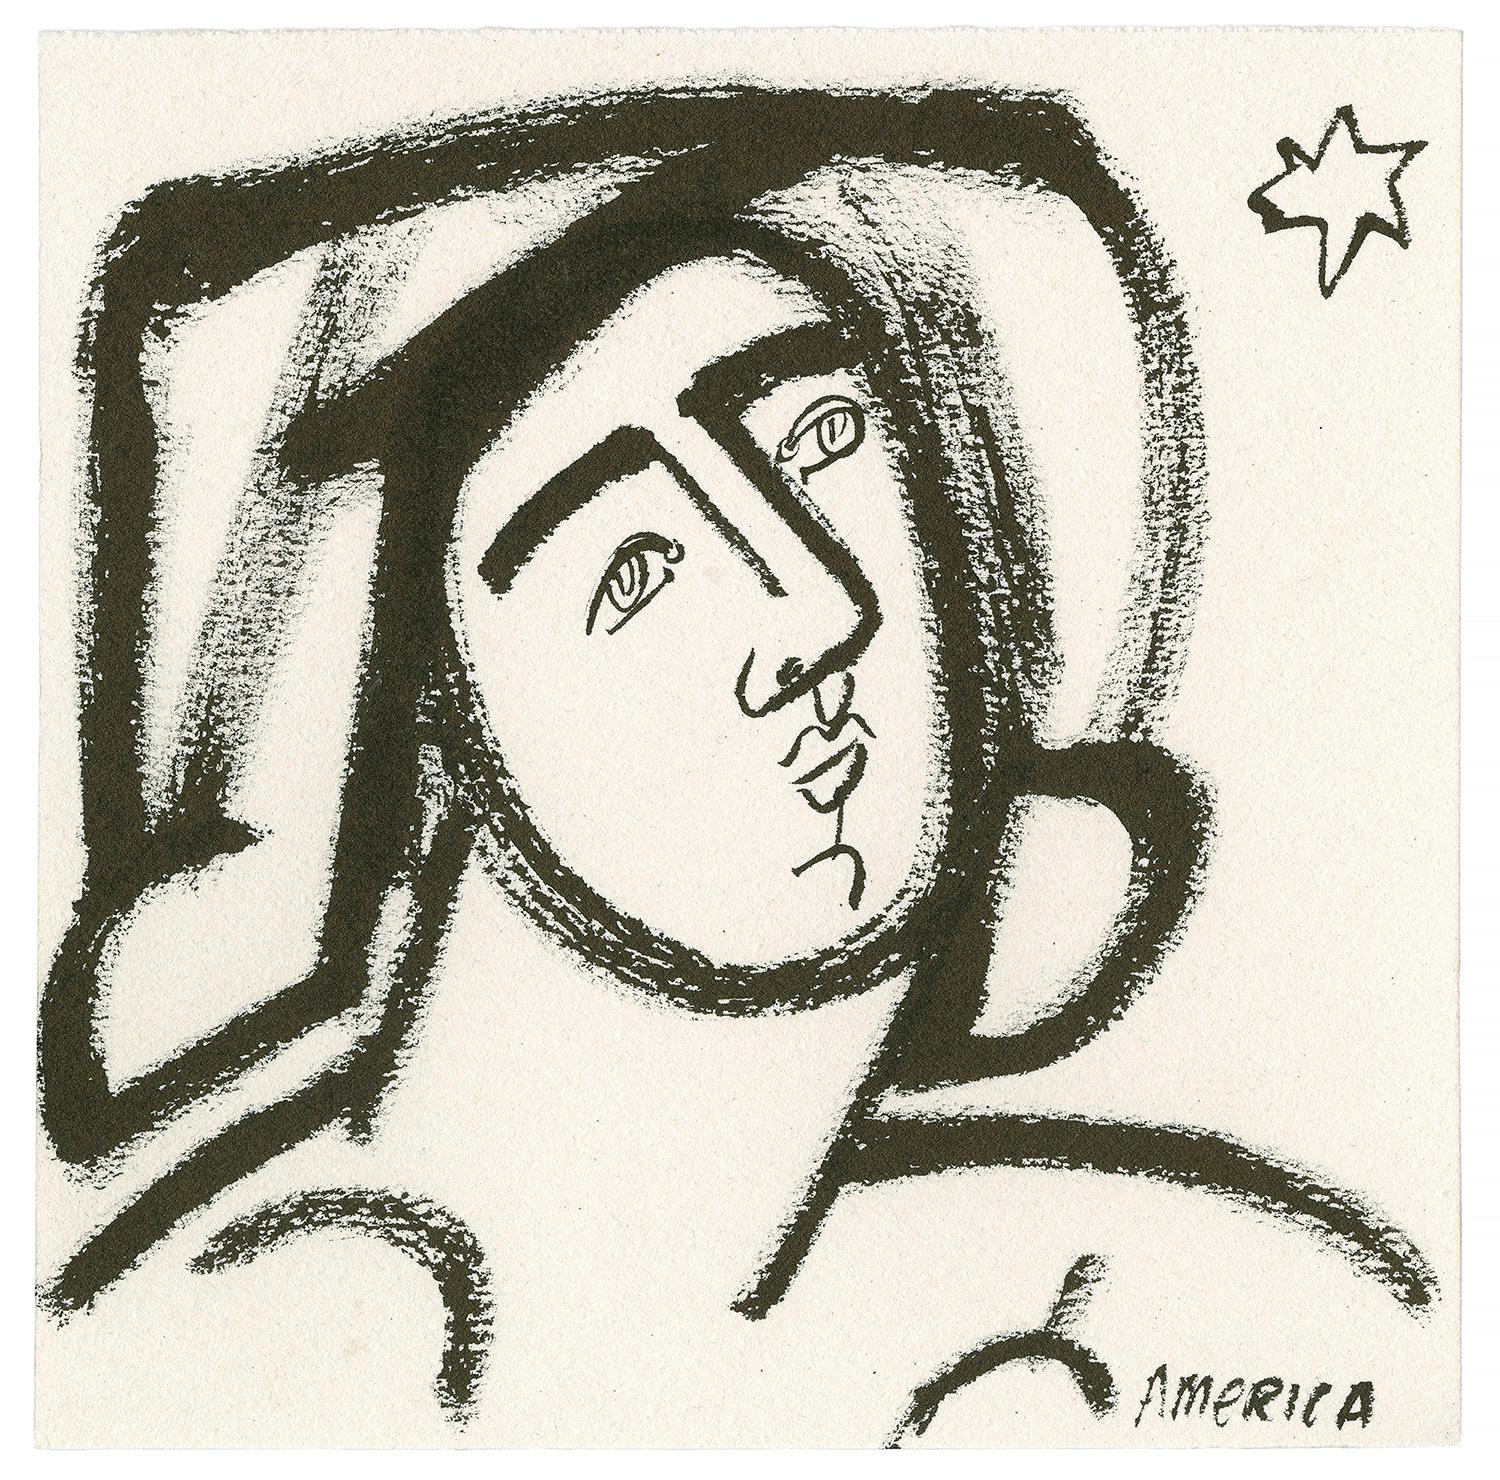 America Martin
"Untitled (Woman and Star)"
Ink on Paper
8.5" x 8.5" Framed 

Exploring the identity of both her namesake and country, LA-based America Martin draws inspiration from her Colombian heritage and the human figure to represent a diverse